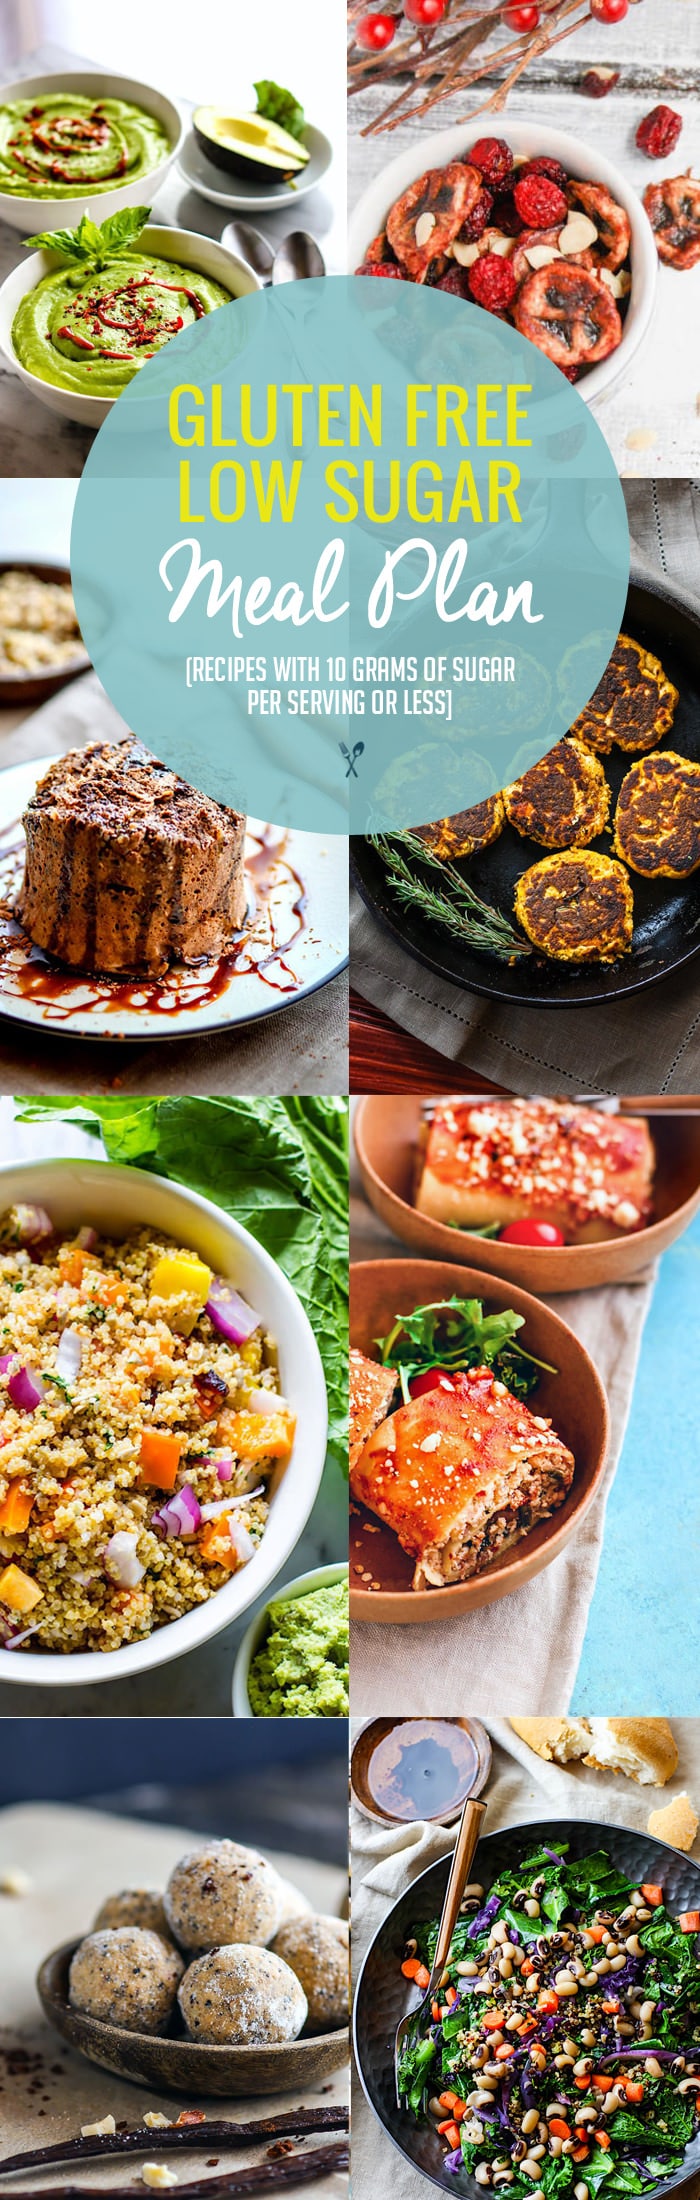 Healthy Lower Sugar Gluten Free Meal Plan Recipes! Snacks/Meals with less than 10 grams sugar per serving. Easy gluten free meal plan ideas to boost health without added sugar or preservatives